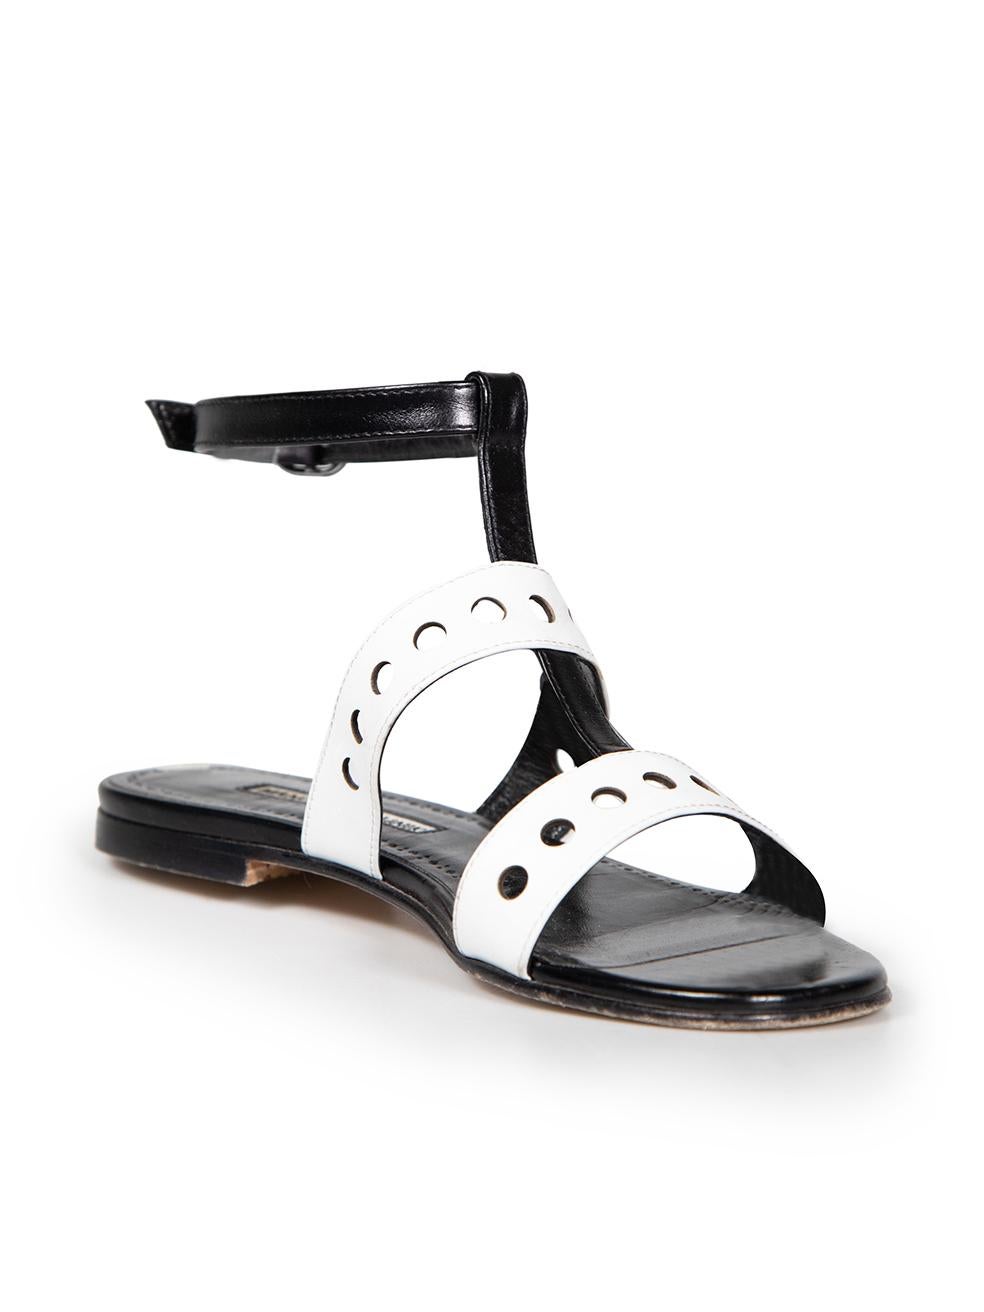 CONDITION is Very good. Minimal wear to sandals is evident. General creasing to the leather and wear on soles on this used Manolo Blahnik designer resale item.
 
 
 
 Details
 
 
 Black and white
 
 Leather
 
 Sandals
 
 Open toe
 
 Flat heel
 
